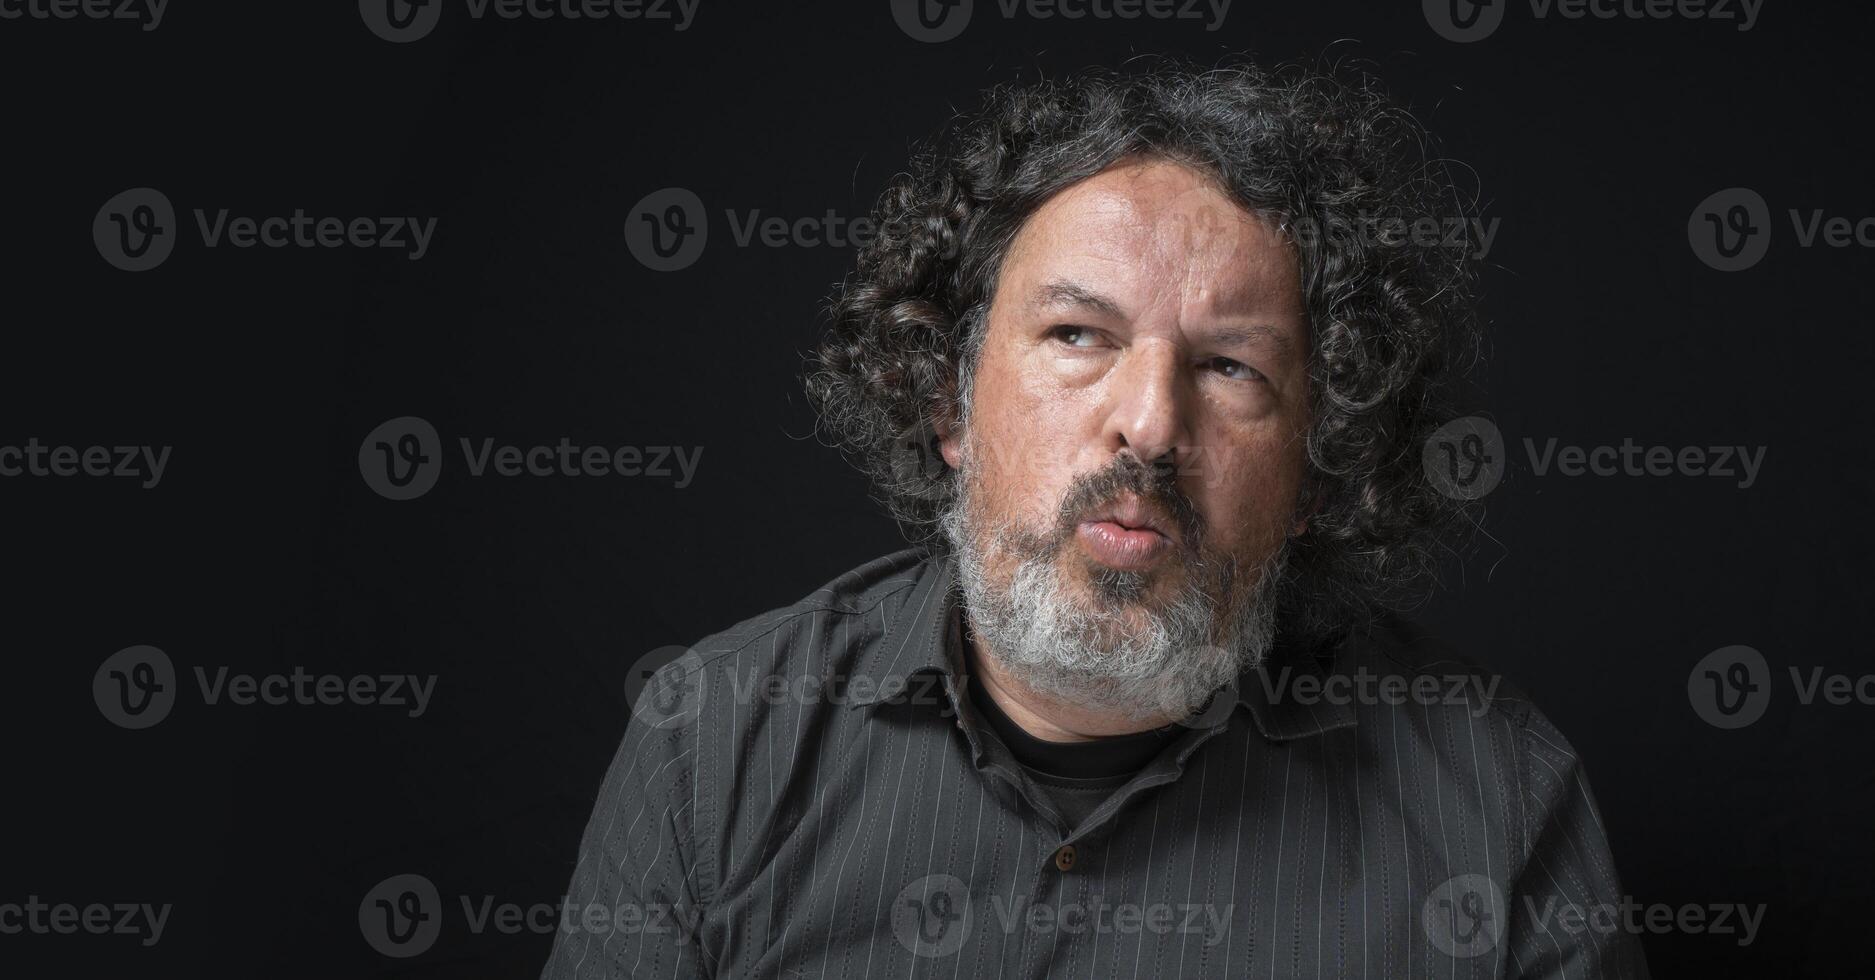 Man with white beard and black curly hair with cautious expression, looking left suspiciously, wearing black shirt against black background photo